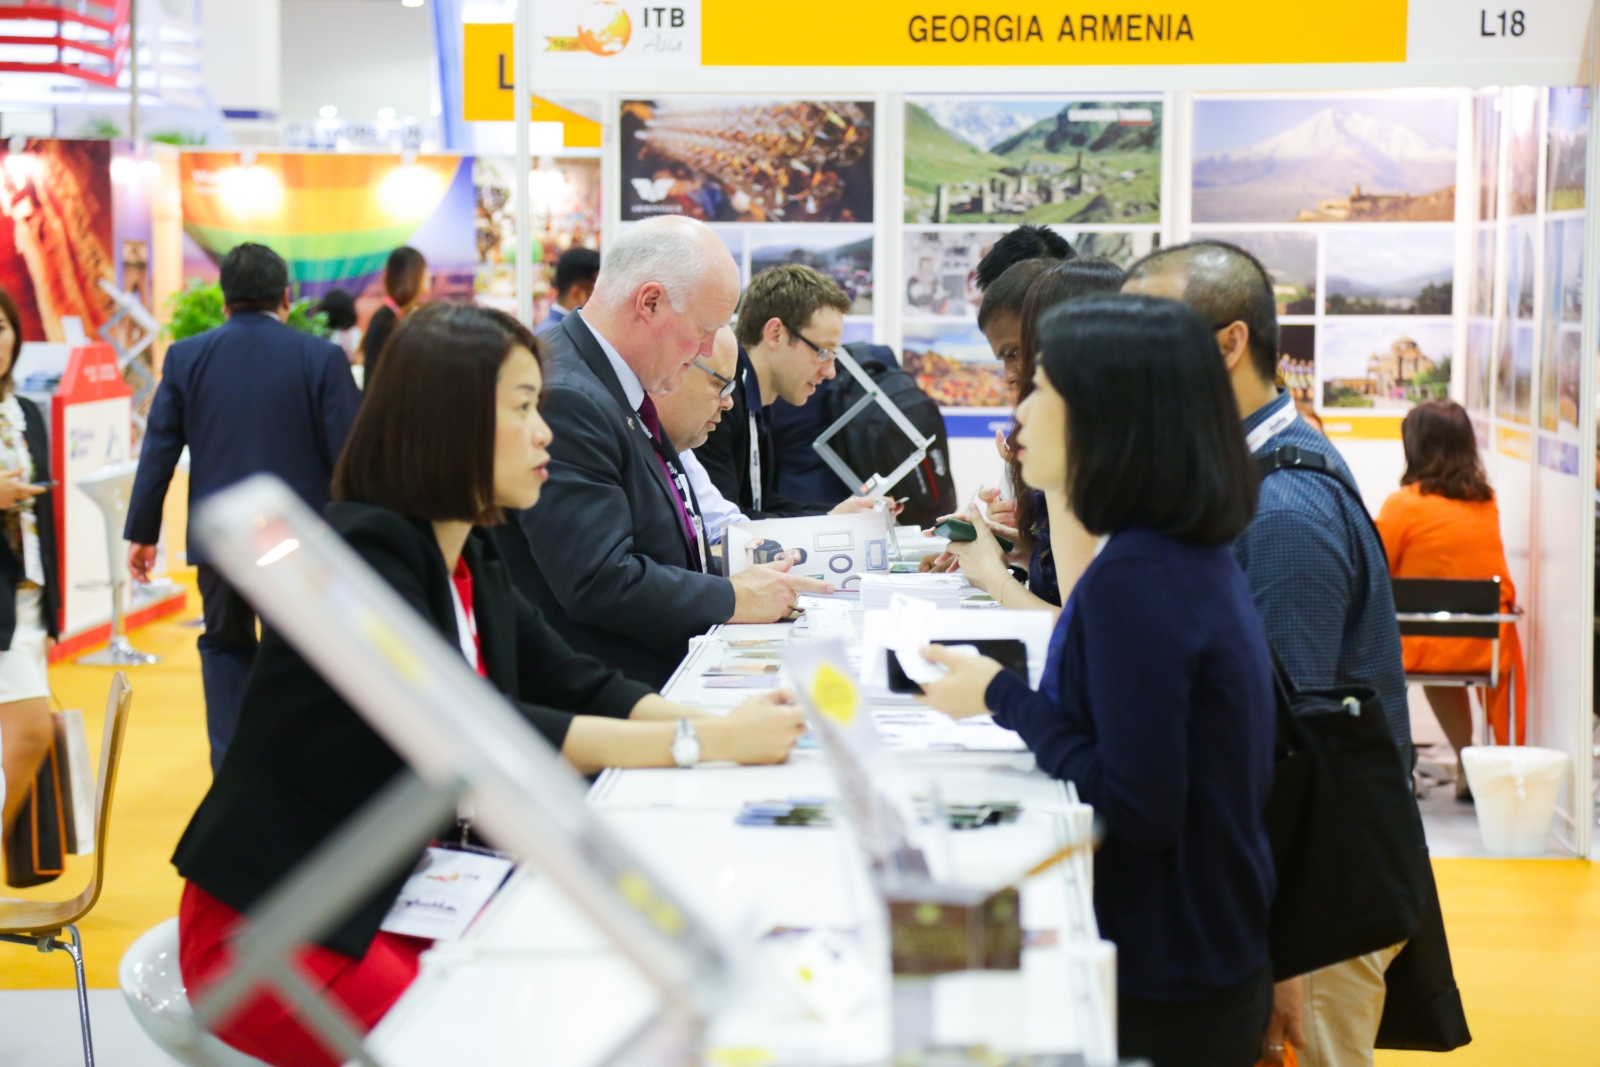 ITB Asia - Travel News, Insights & Resources.